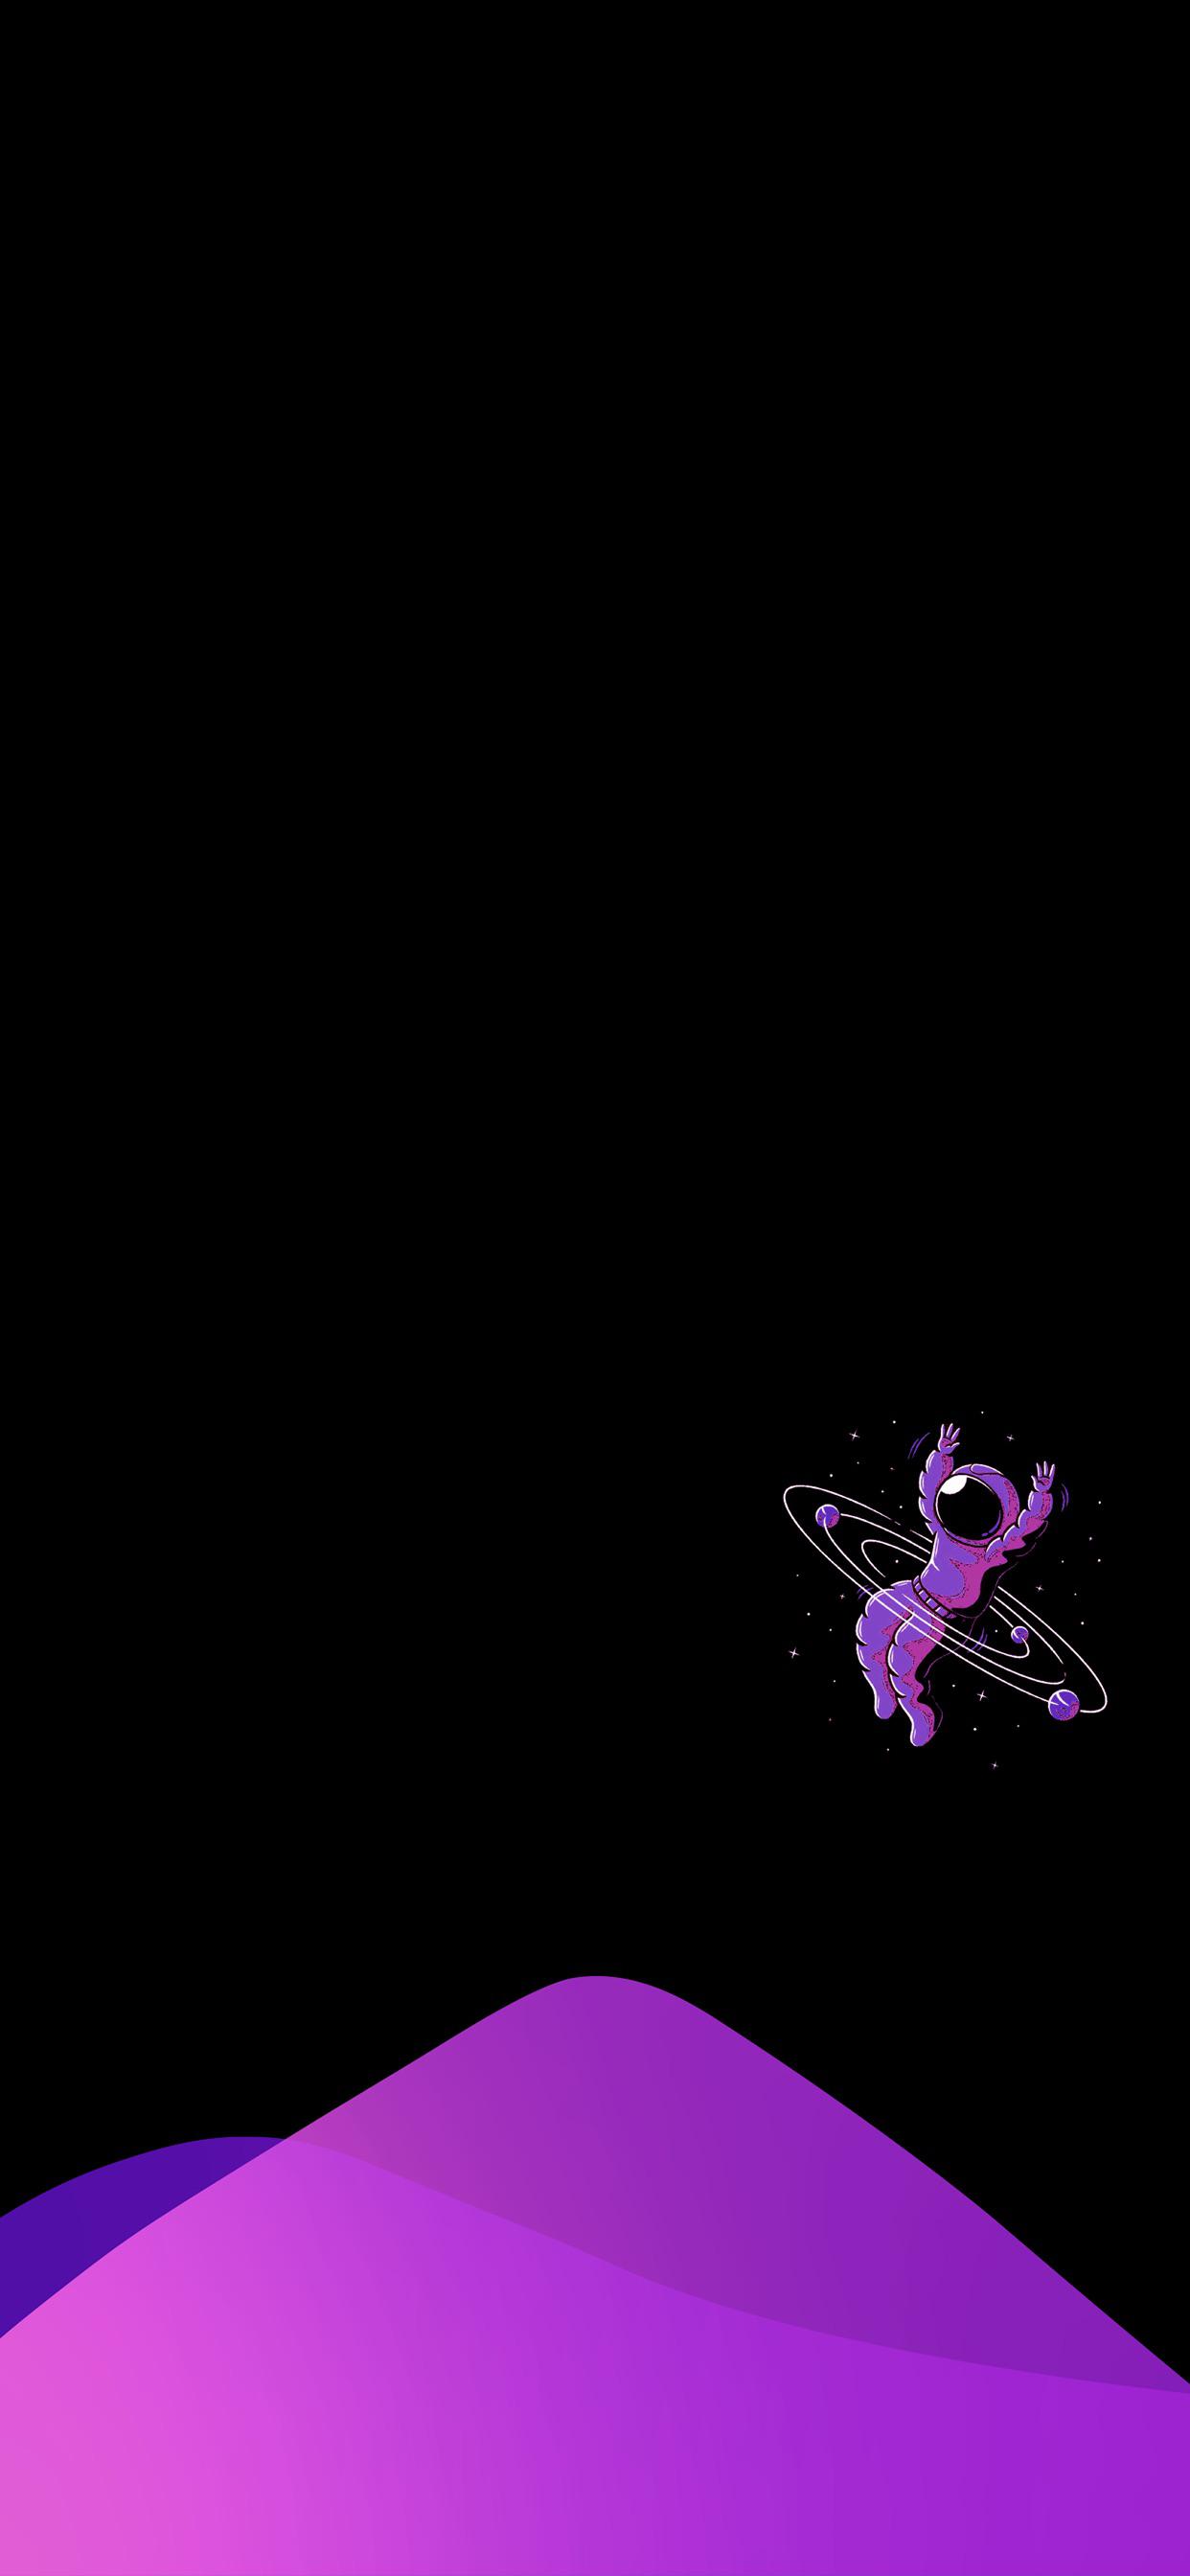 Just a clean purple wallpaper I made [2436x1125]